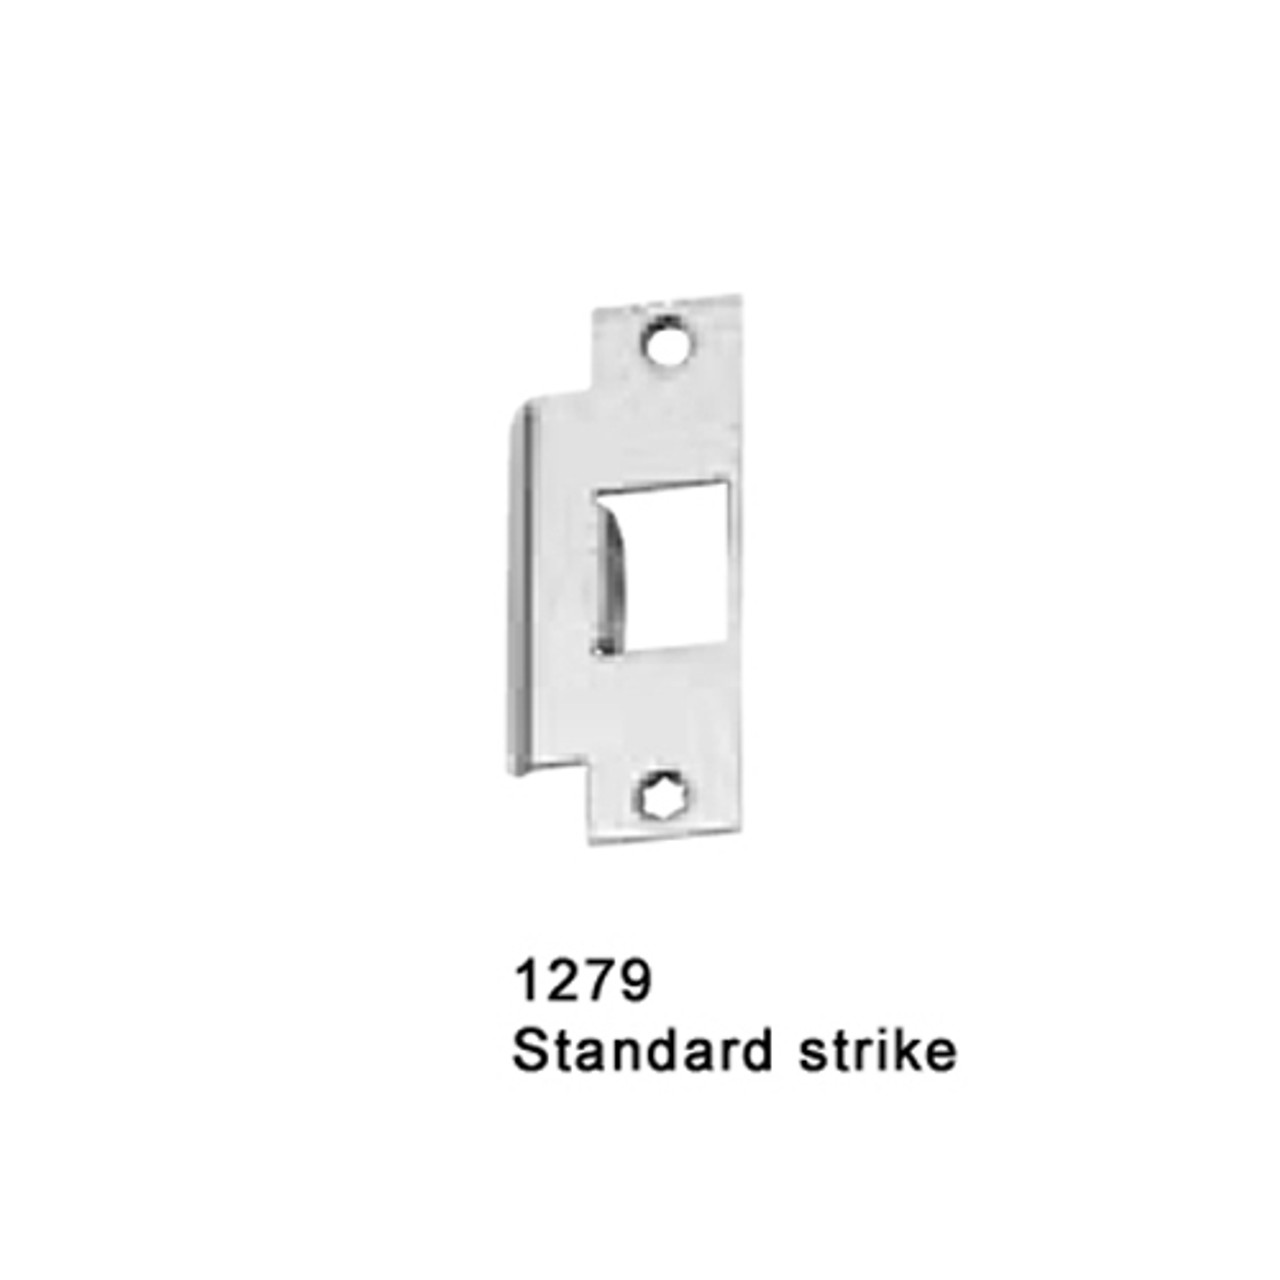 CD25-M-L-BE-DANE-US28-3-RHR Falcon 25 Series Mortise Lock Devices 510L-BE Dane Lever Trim with Blank Escutcheon in Anodized Aluminum